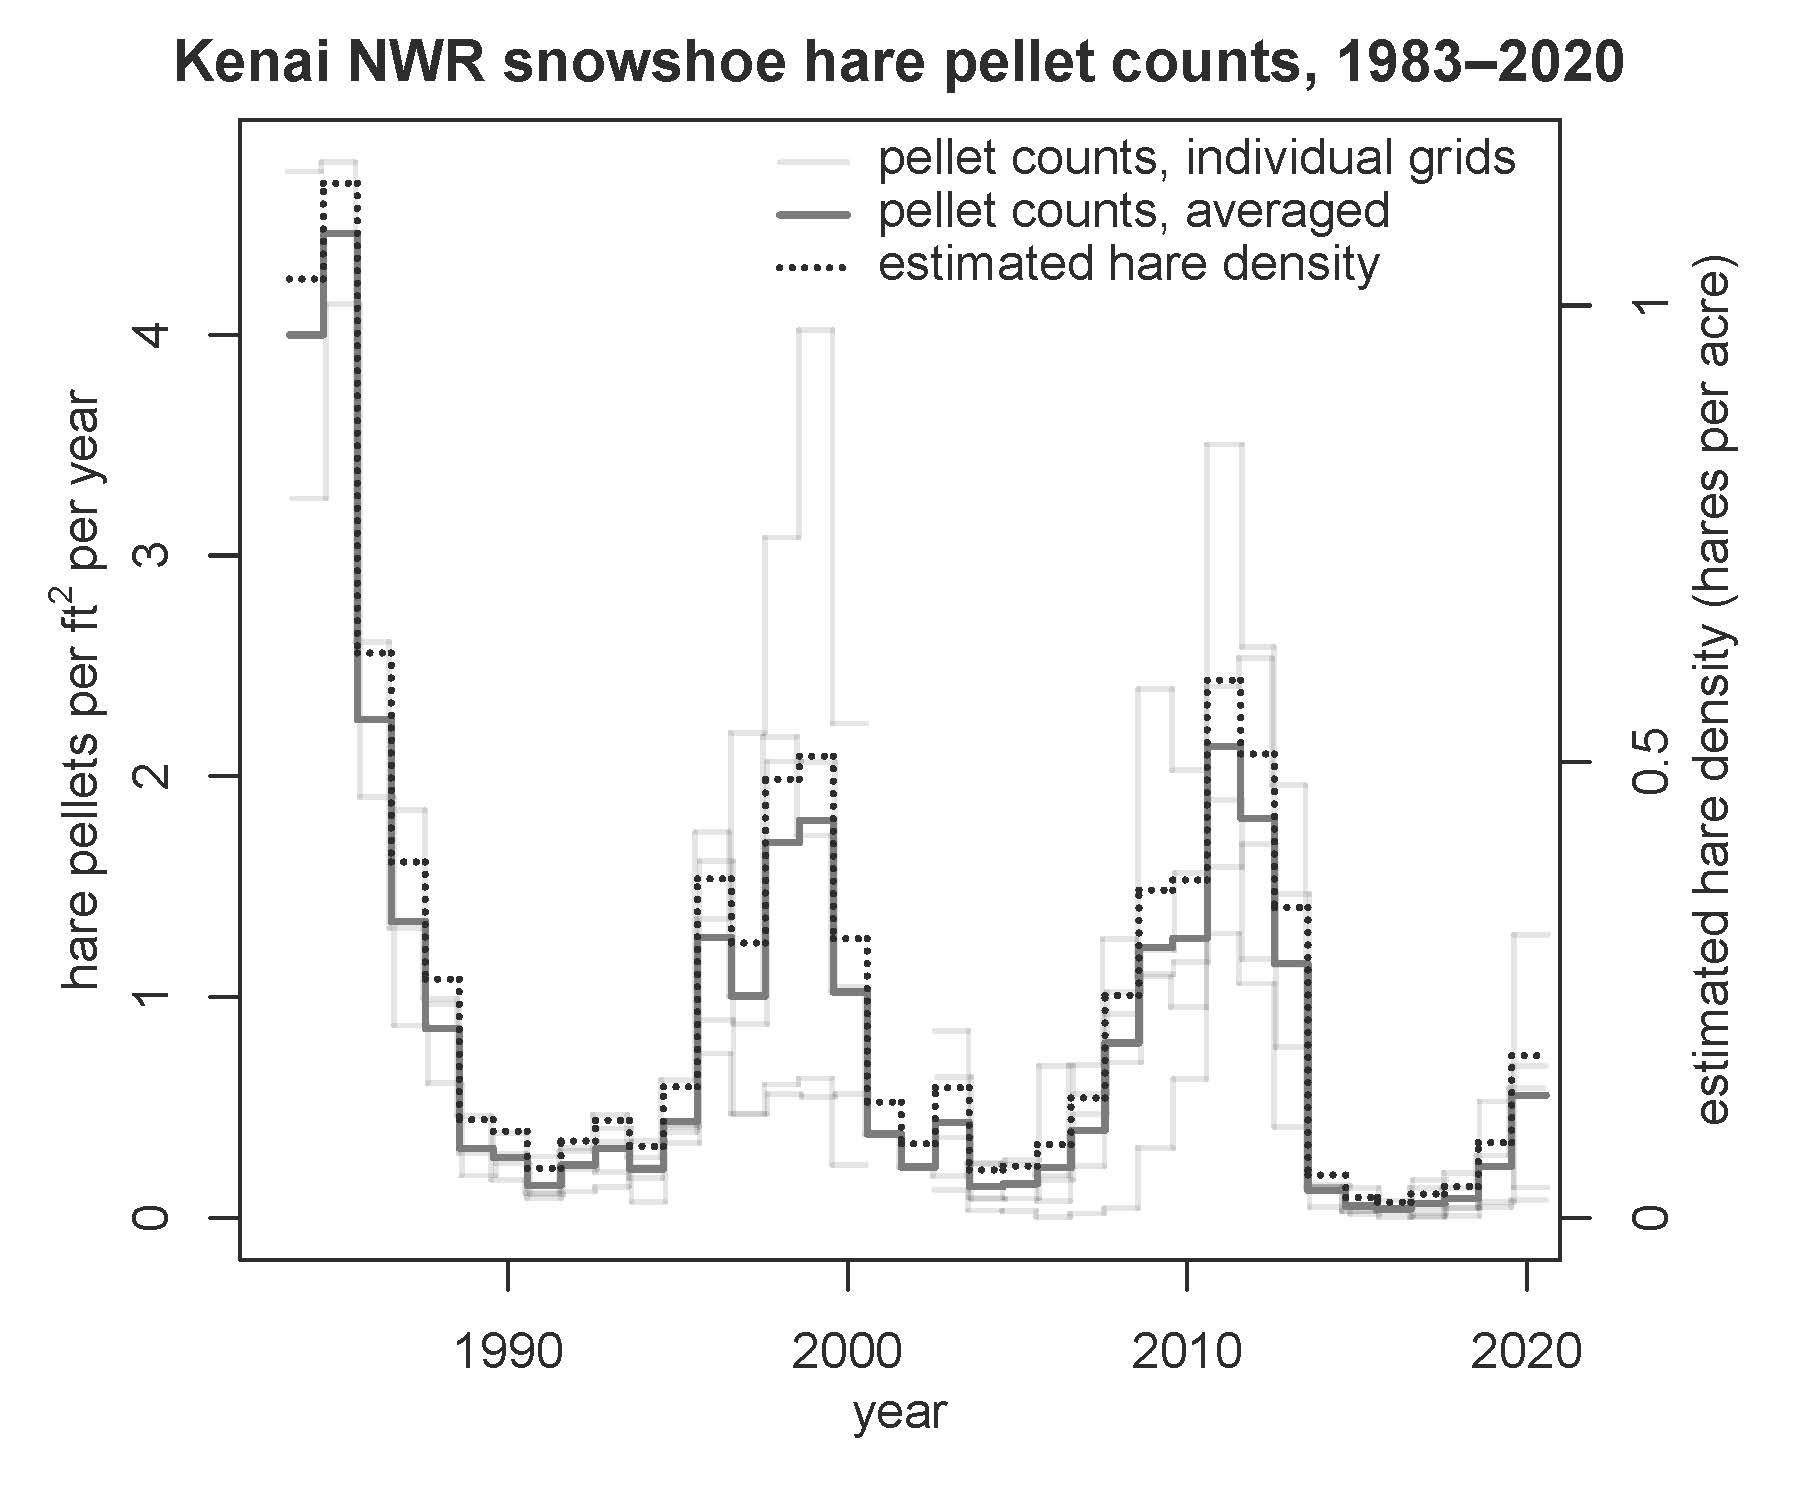 Snowshoe hare pellet counts. (Provided by Kenai National Wildlife Refuge)